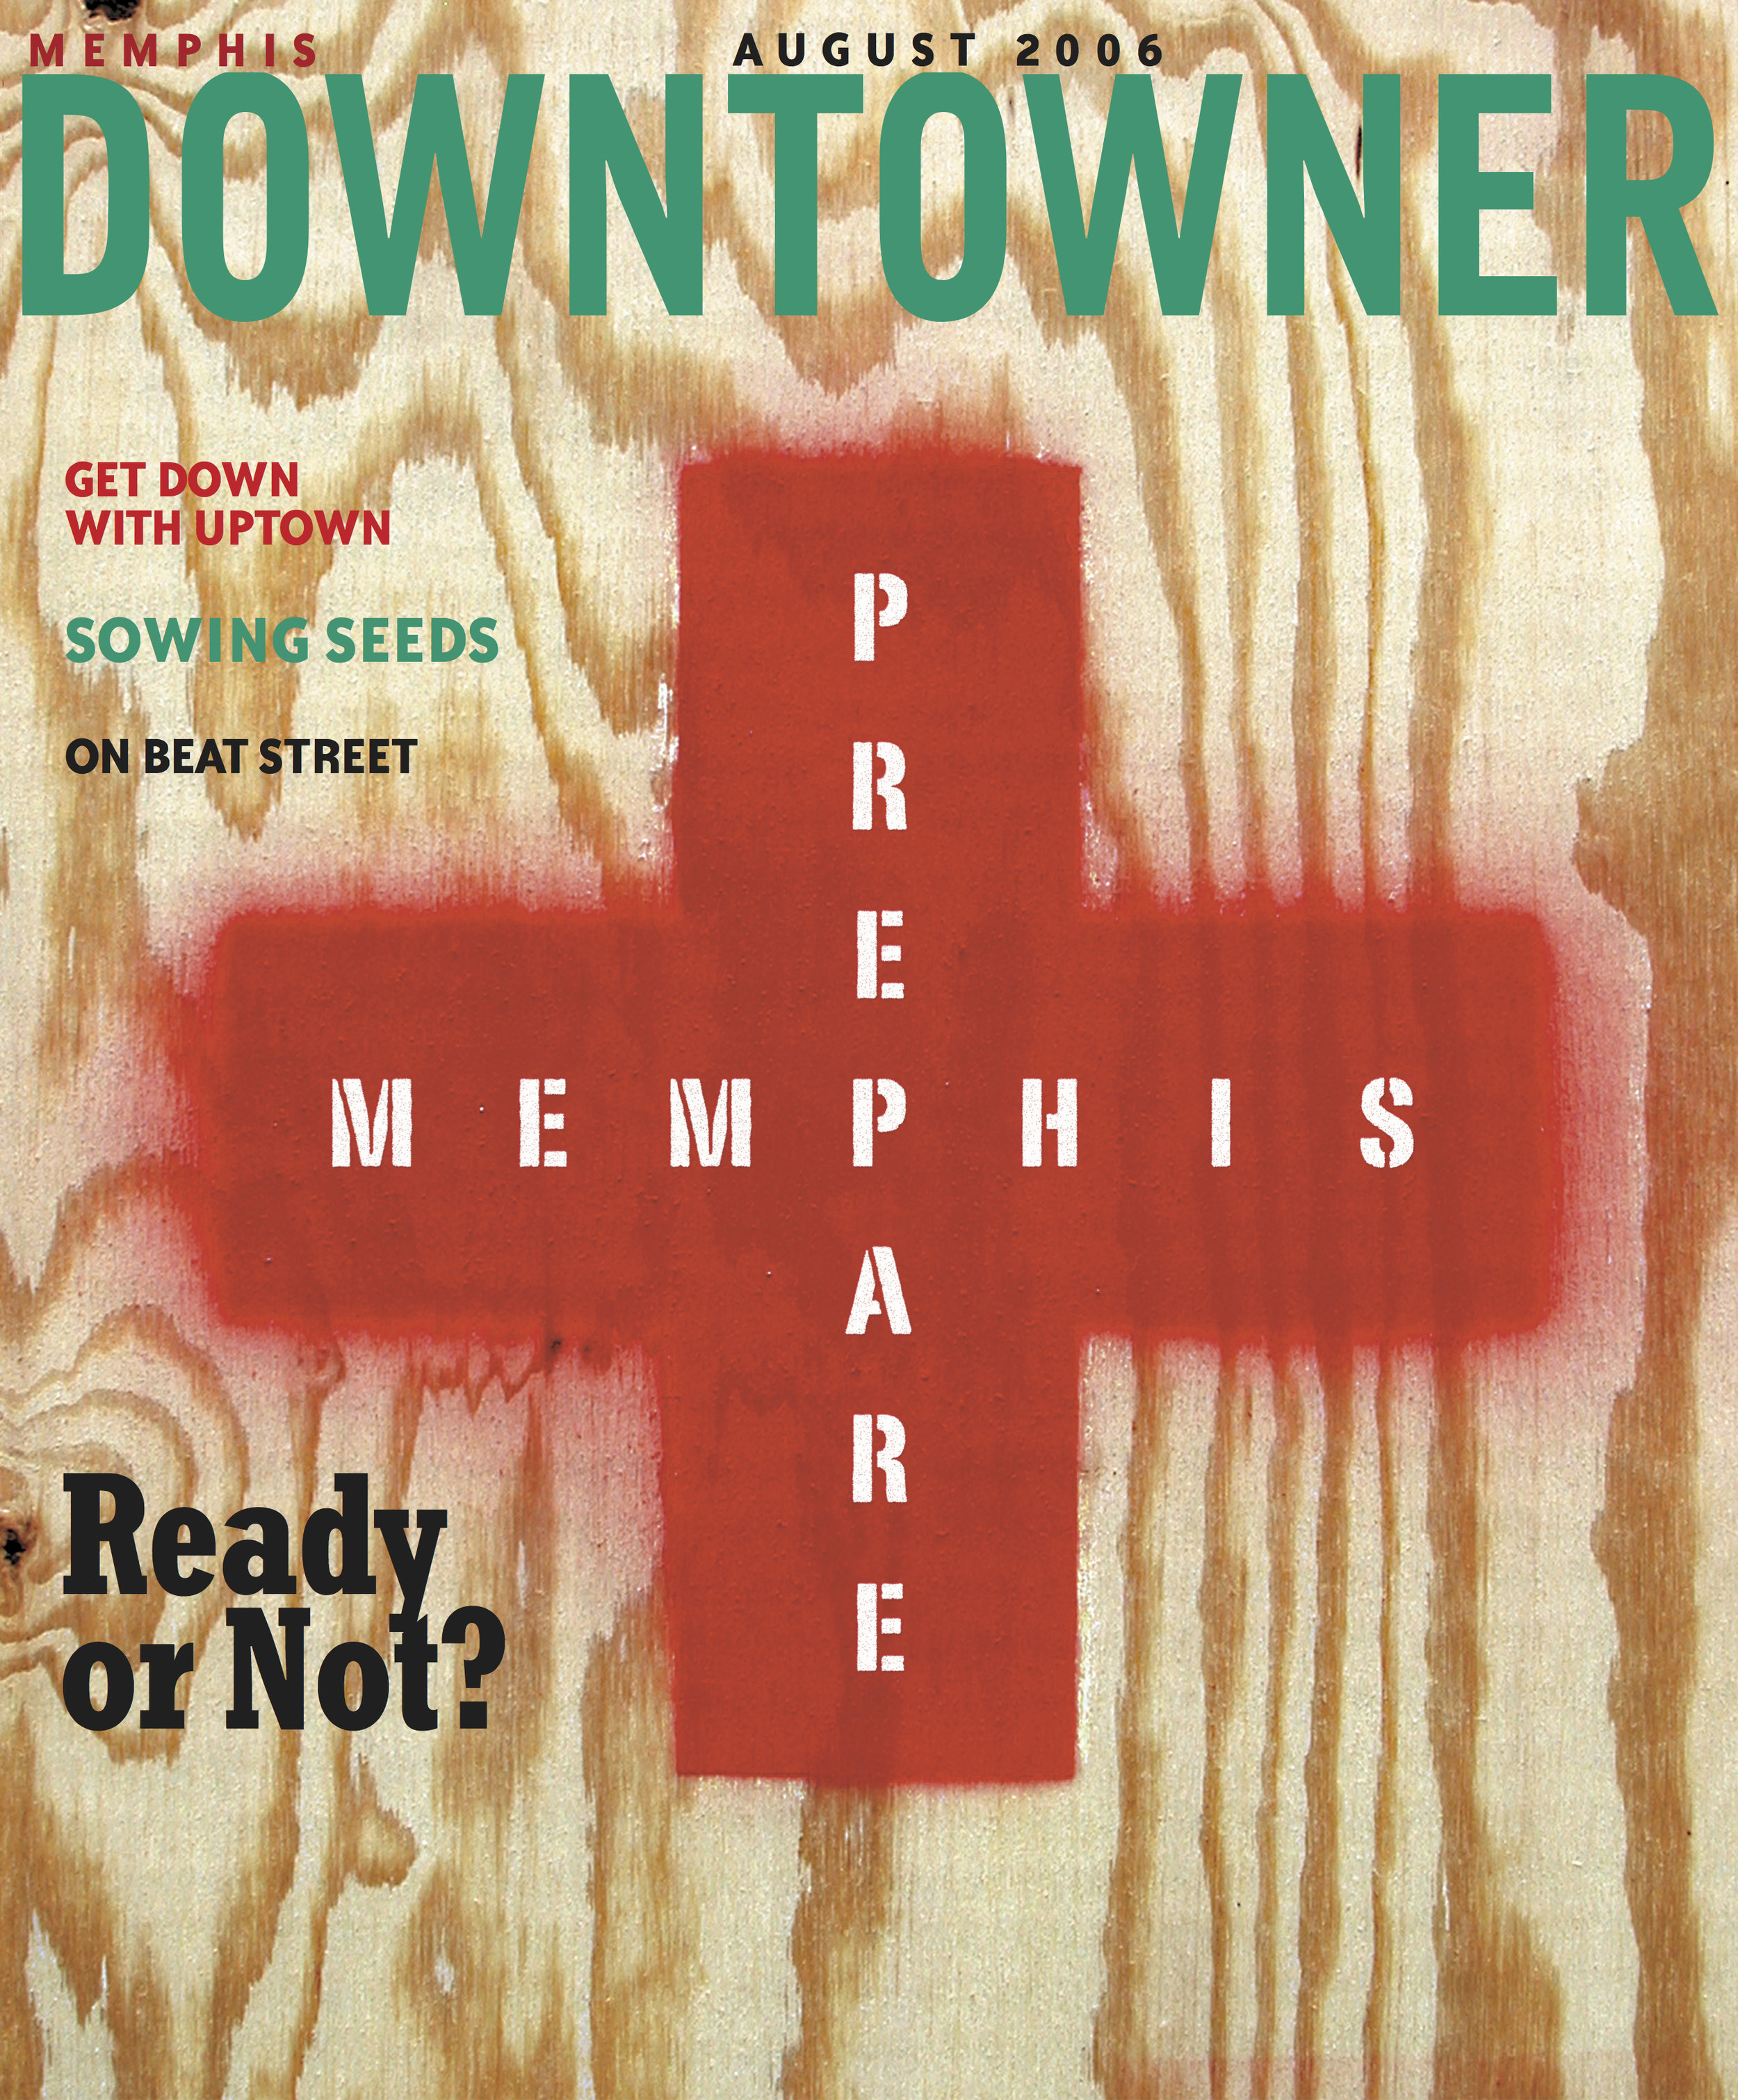  Memphis Downtowner Magazine  Prepare Memphis, Red Cross Readiness  Publication design by Chuck Mitchell  Photograph by Chuck Mitchell 